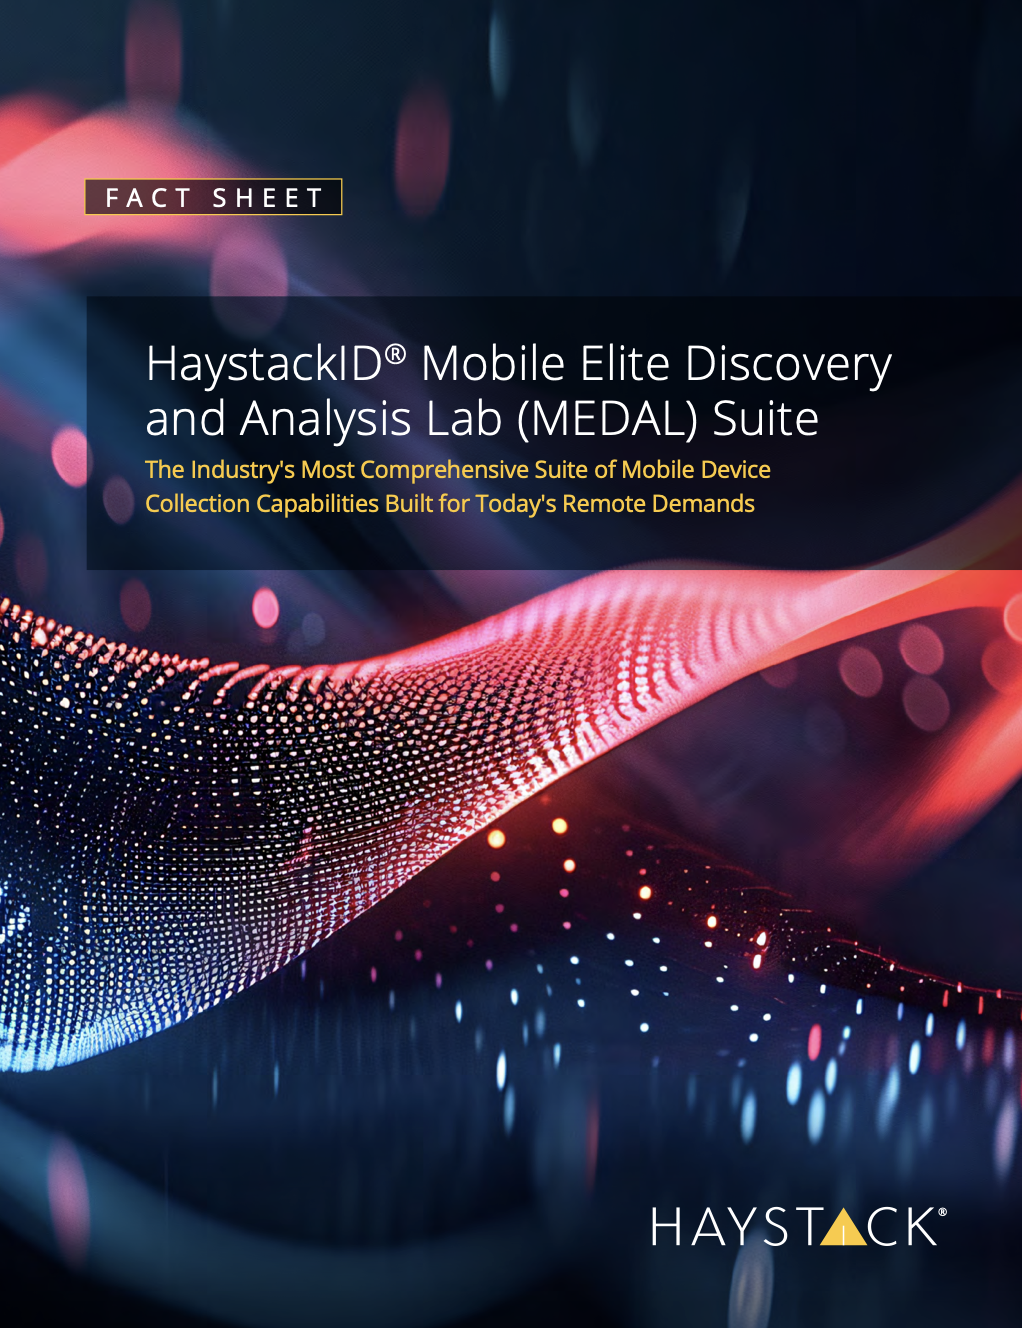 PDF Cover Image: HaystackID Mobile Elite Discovery and Analysis Lab (MEDAL) Suite